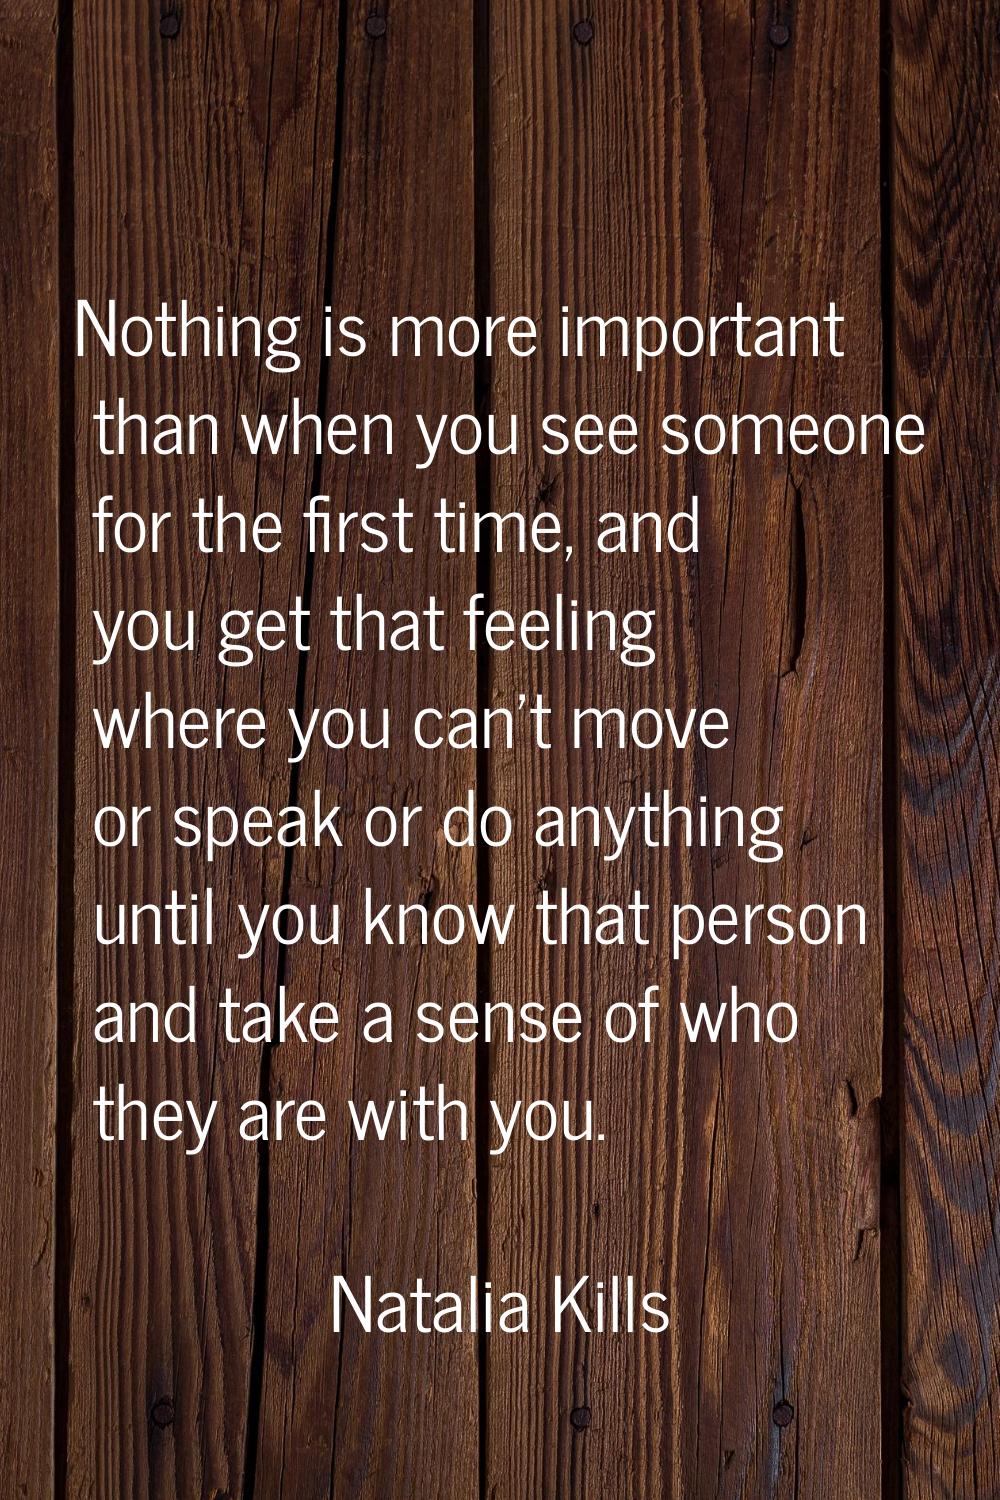 Nothing is more important than when you see someone for the first time, and you get that feeling wh